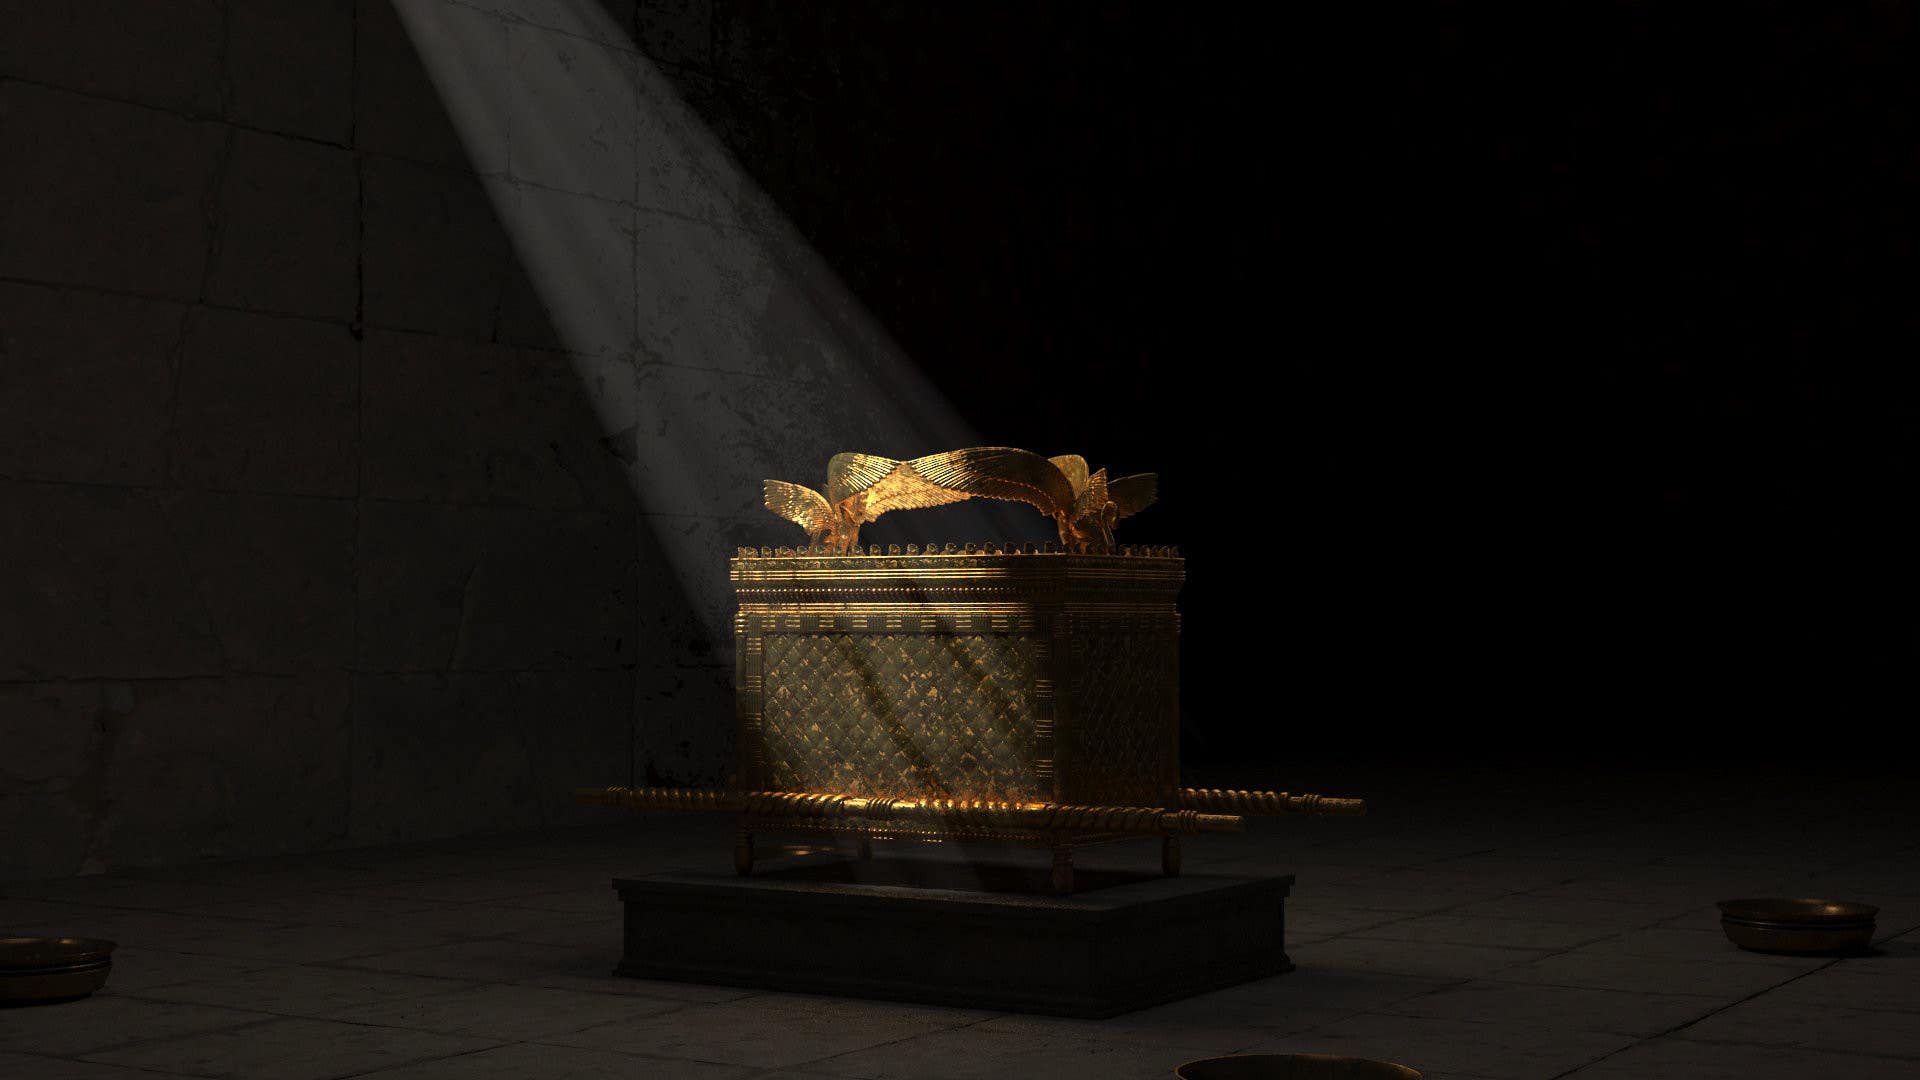 One man's quest for the Ark of the Covenant led to a completely different find